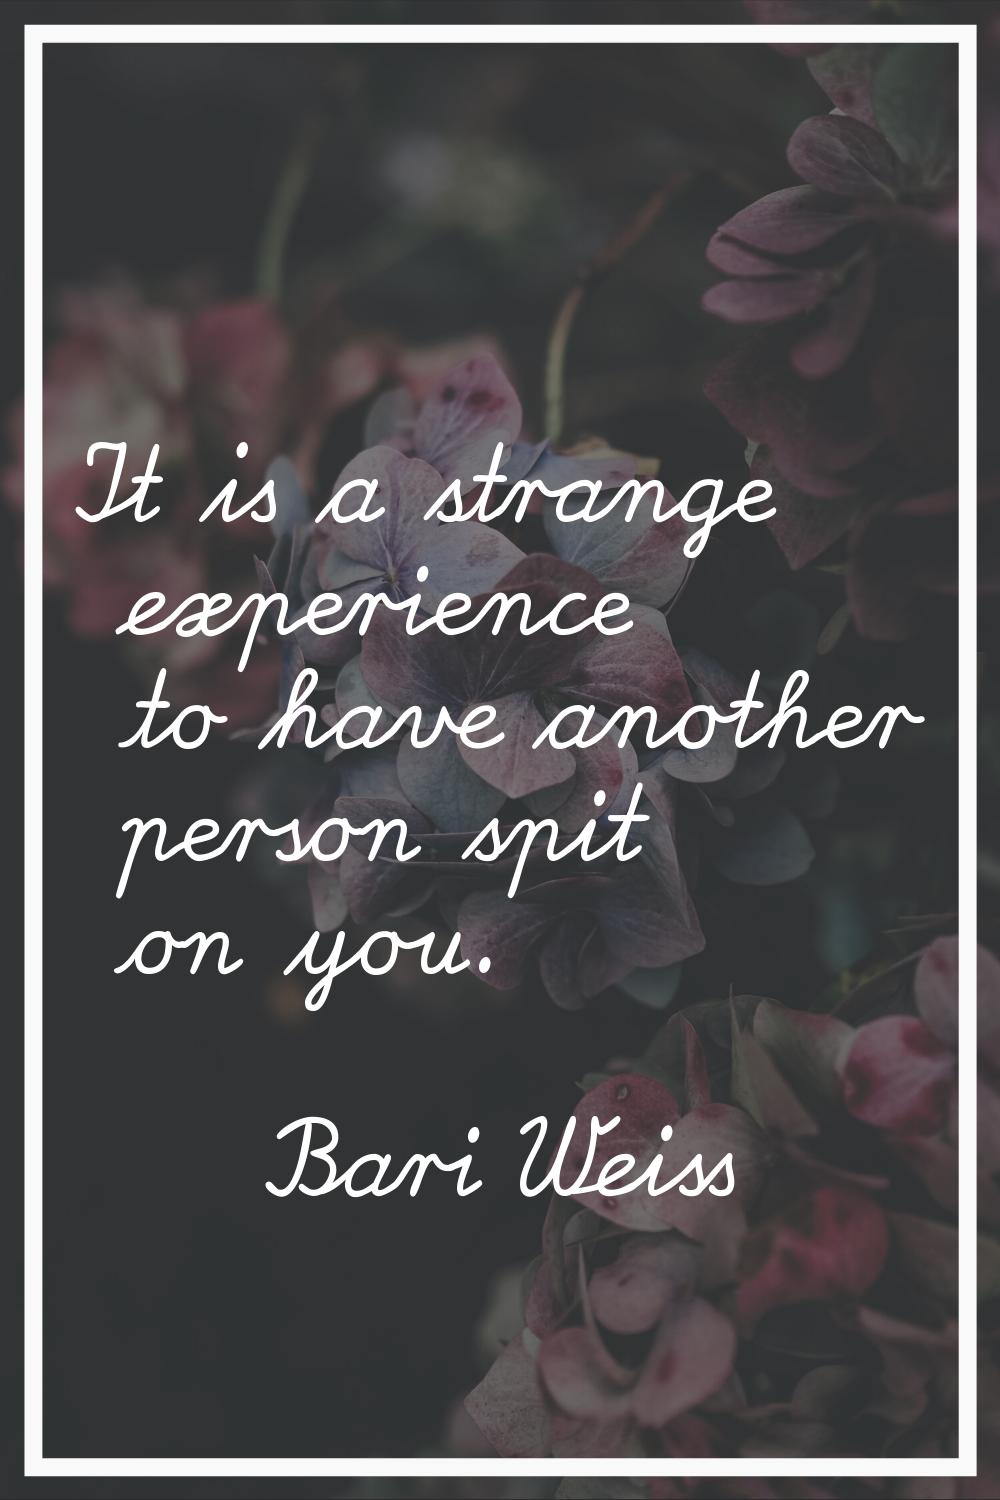 It is a strange experience to have another person spit on you.